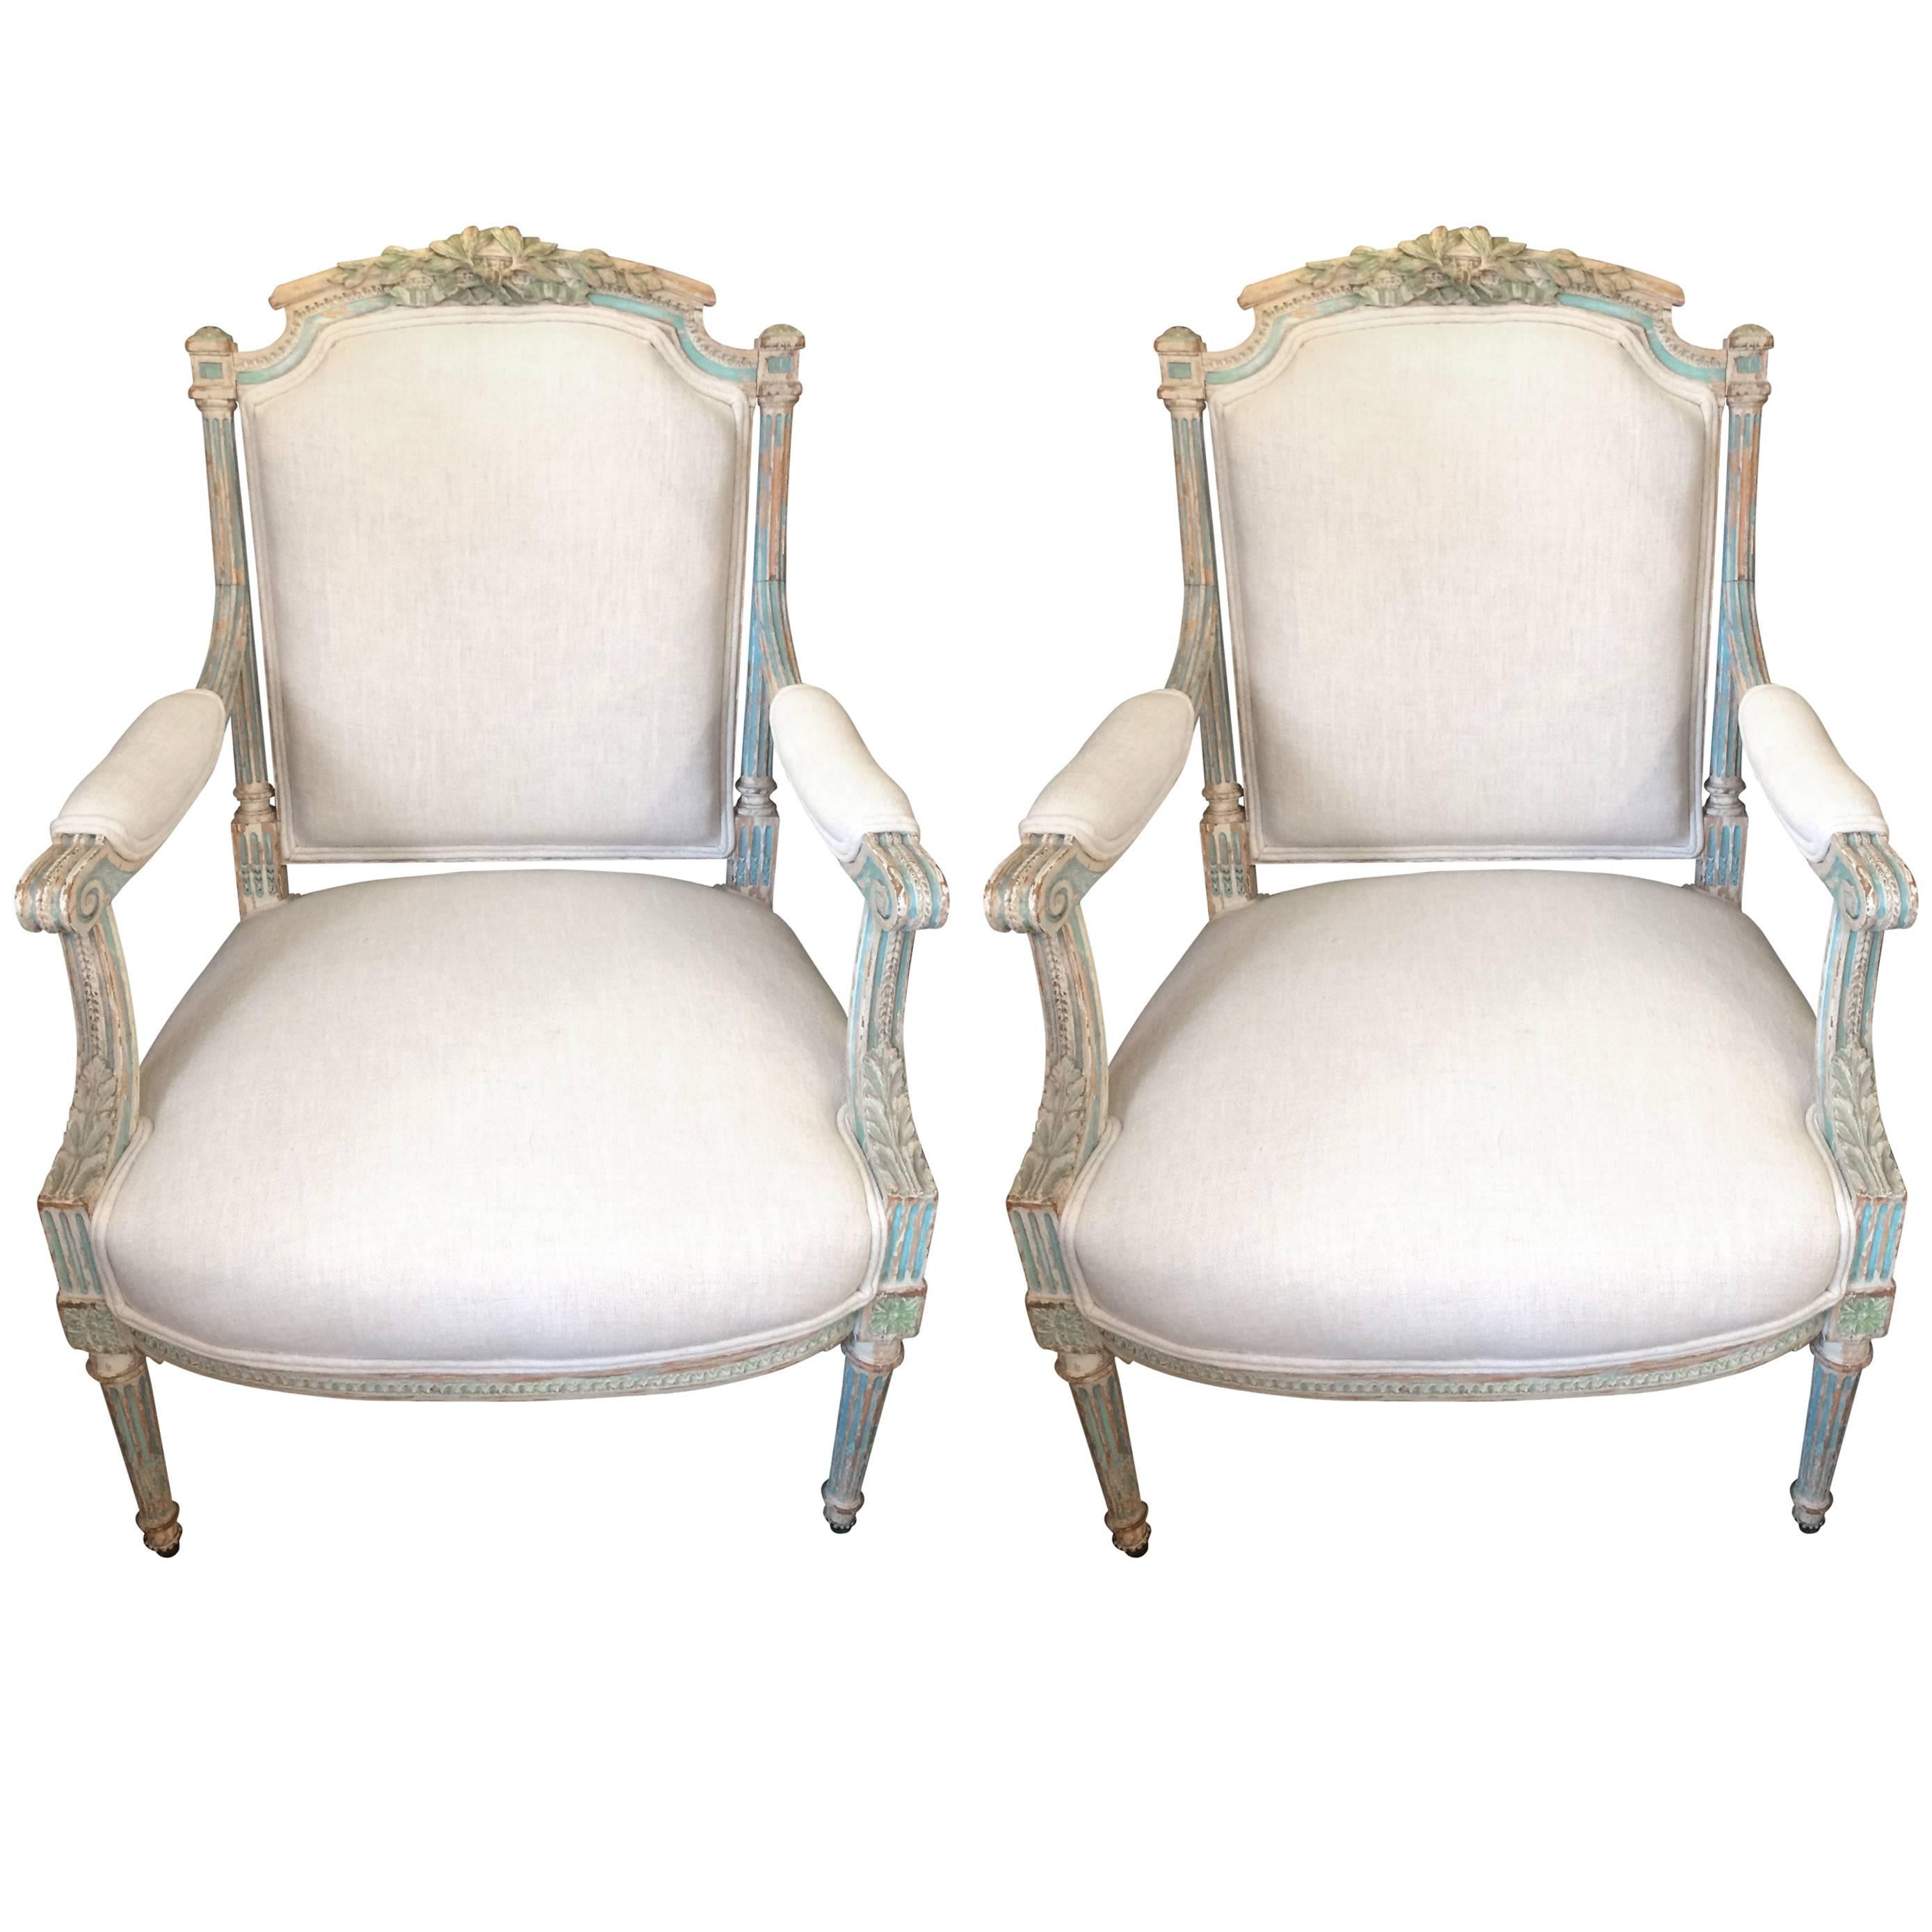 Pair of Lovely French Style Painted Wood Armchairs